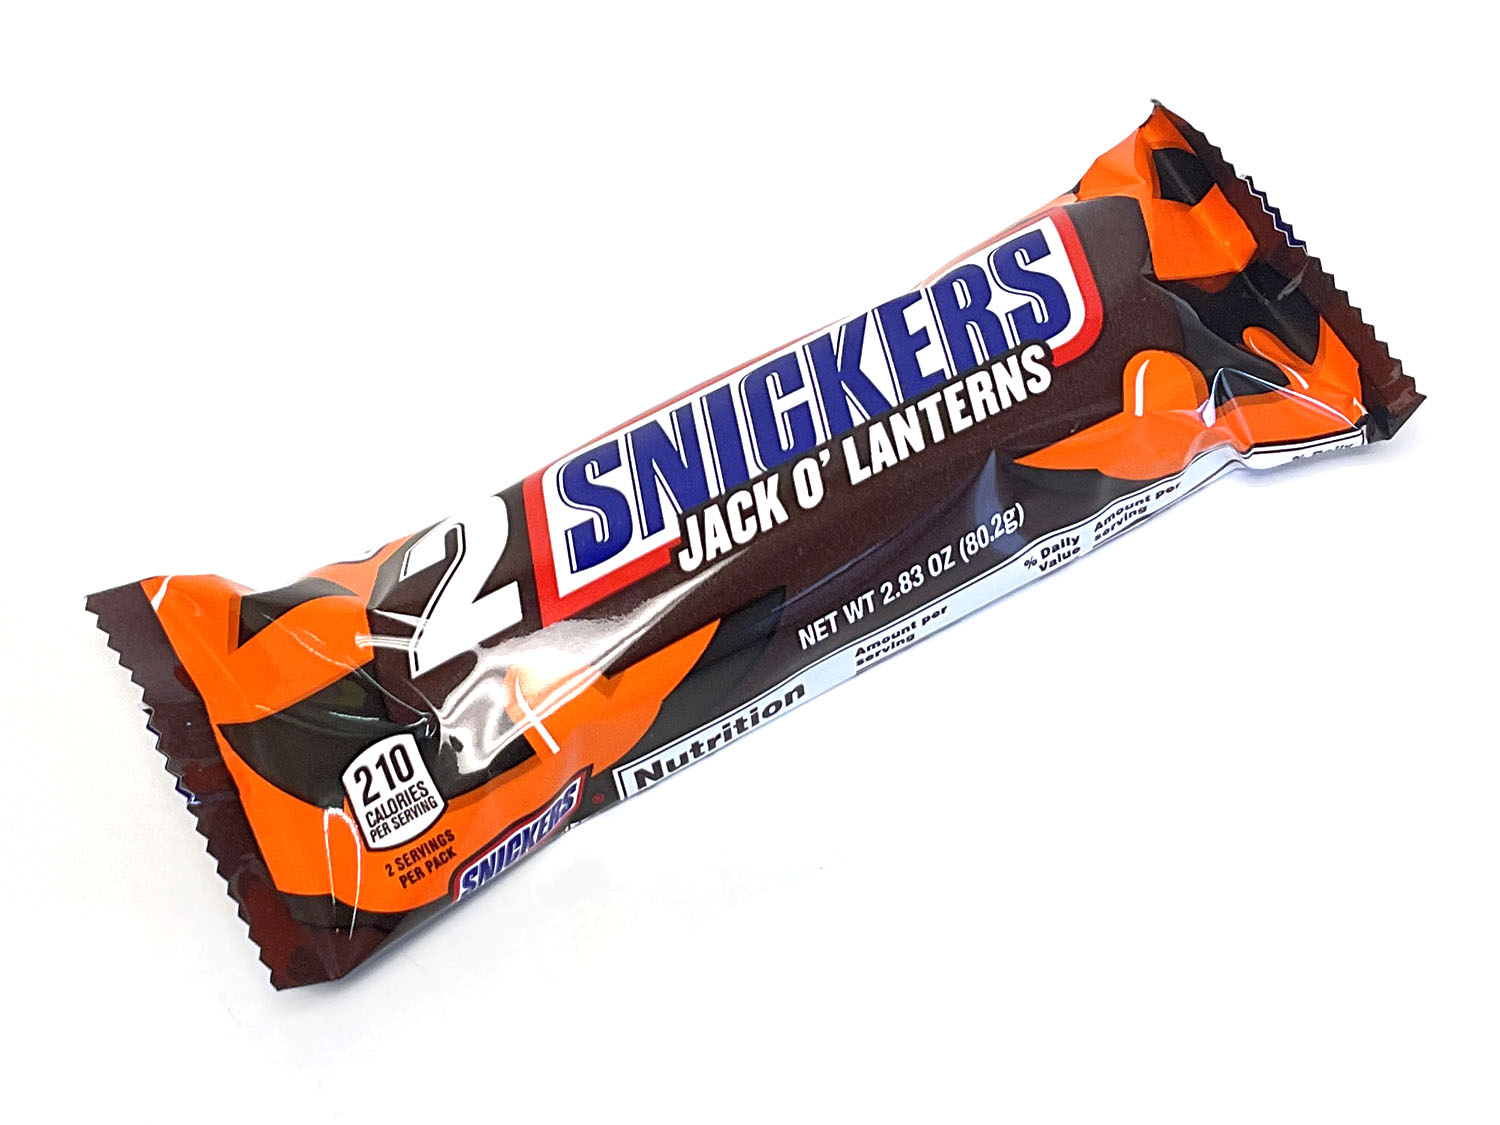 Snickers Jack-O-Lantern - 2 pack